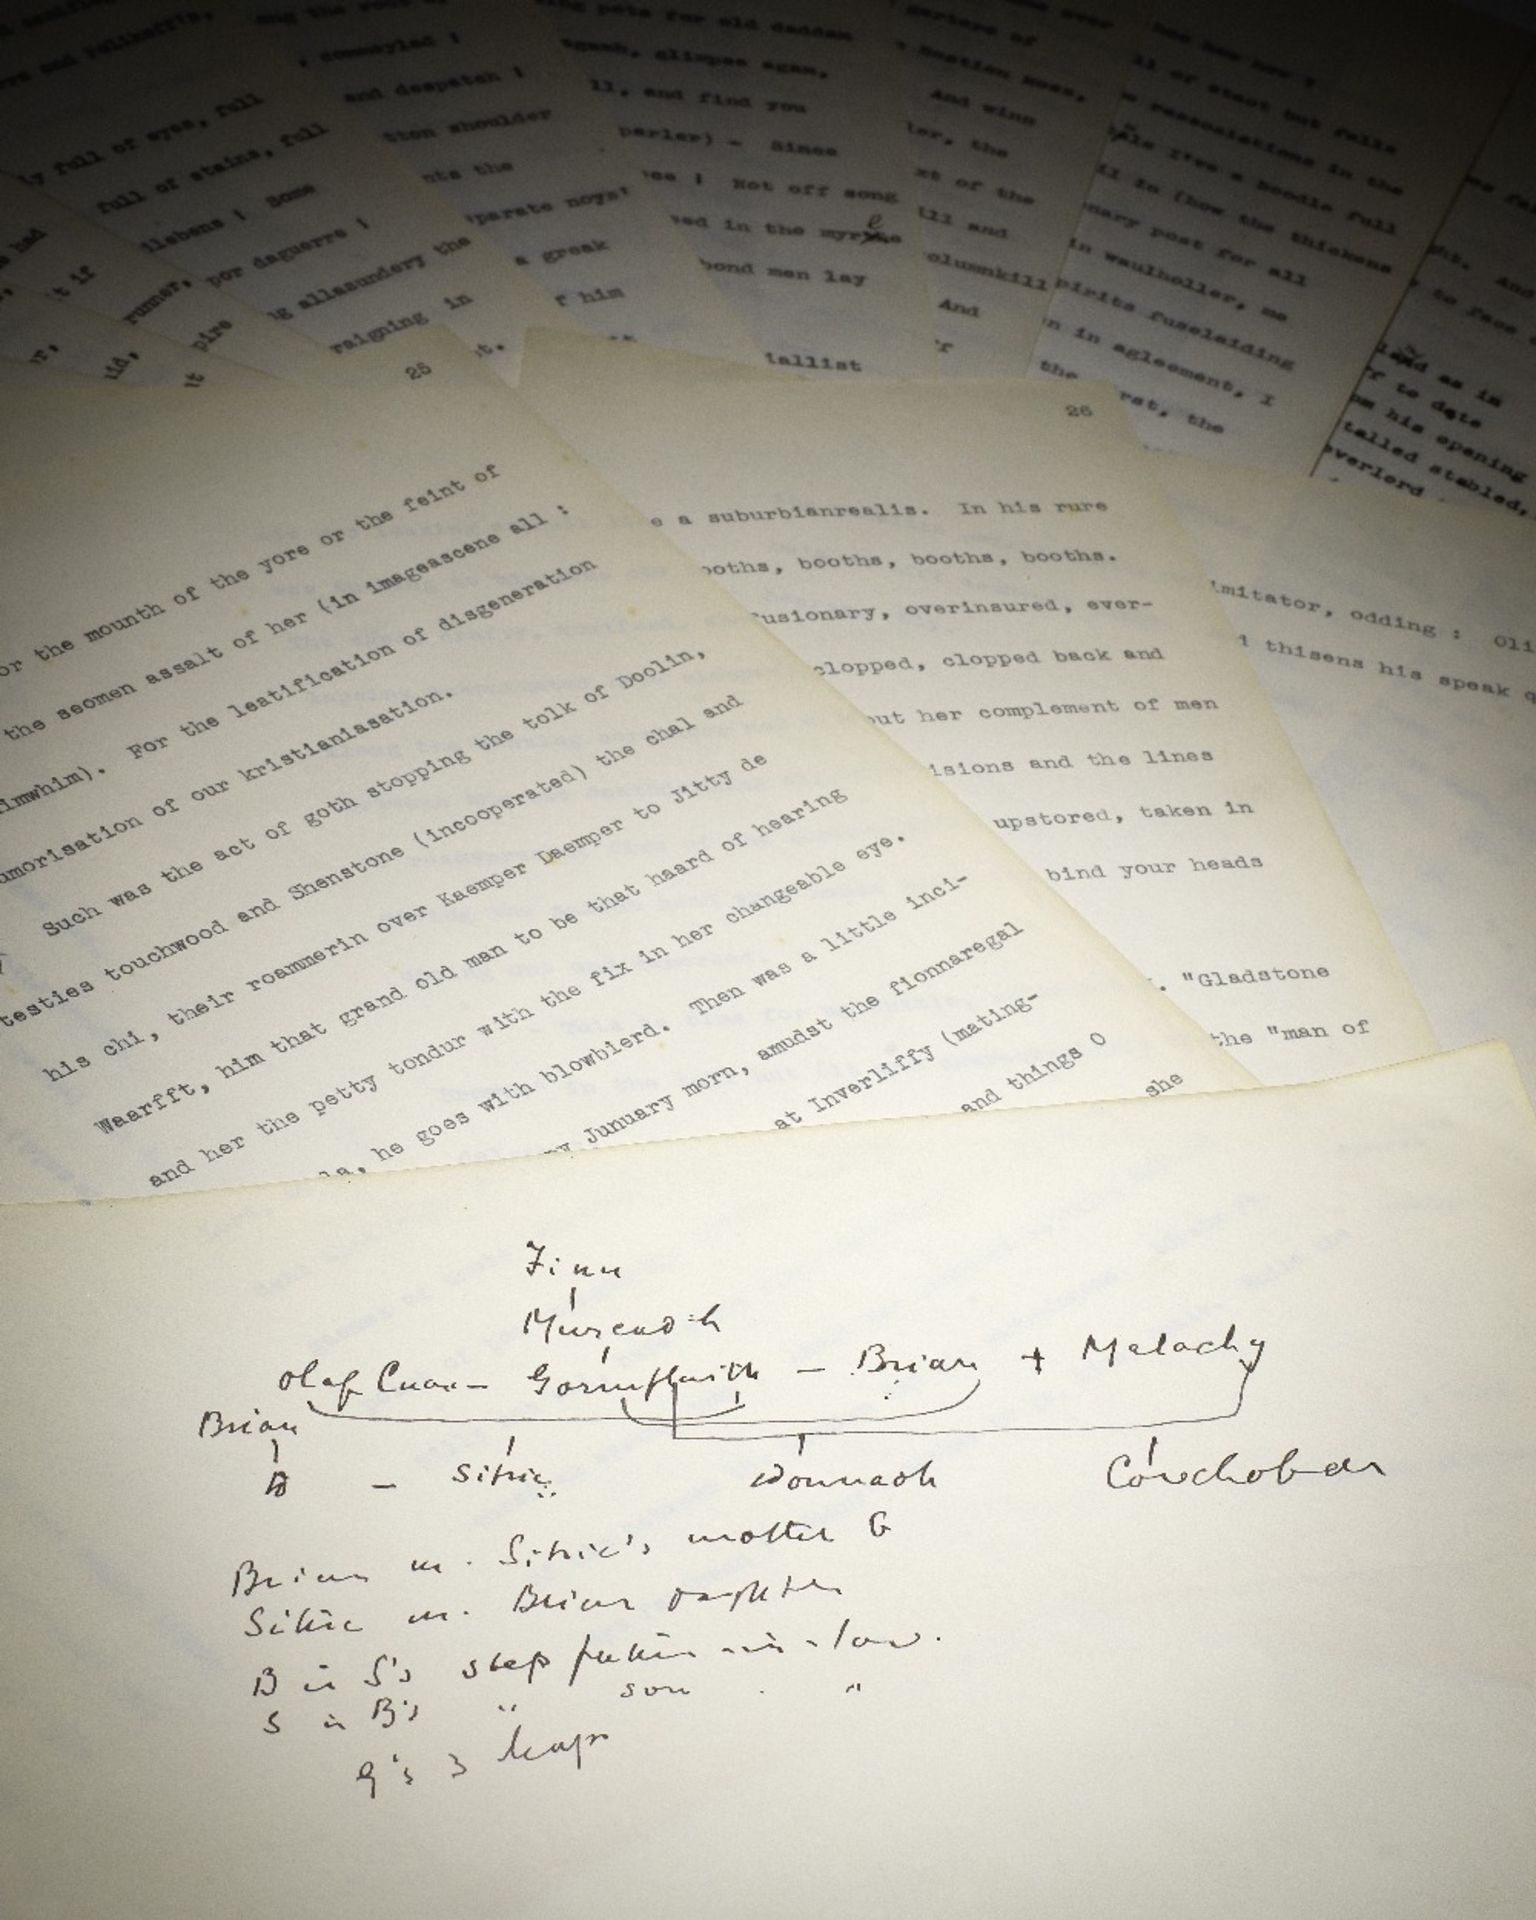 JOYCE (JAMES) Annotated typescripts from Finnegans Wake, [mainly Paris, 1936-37]